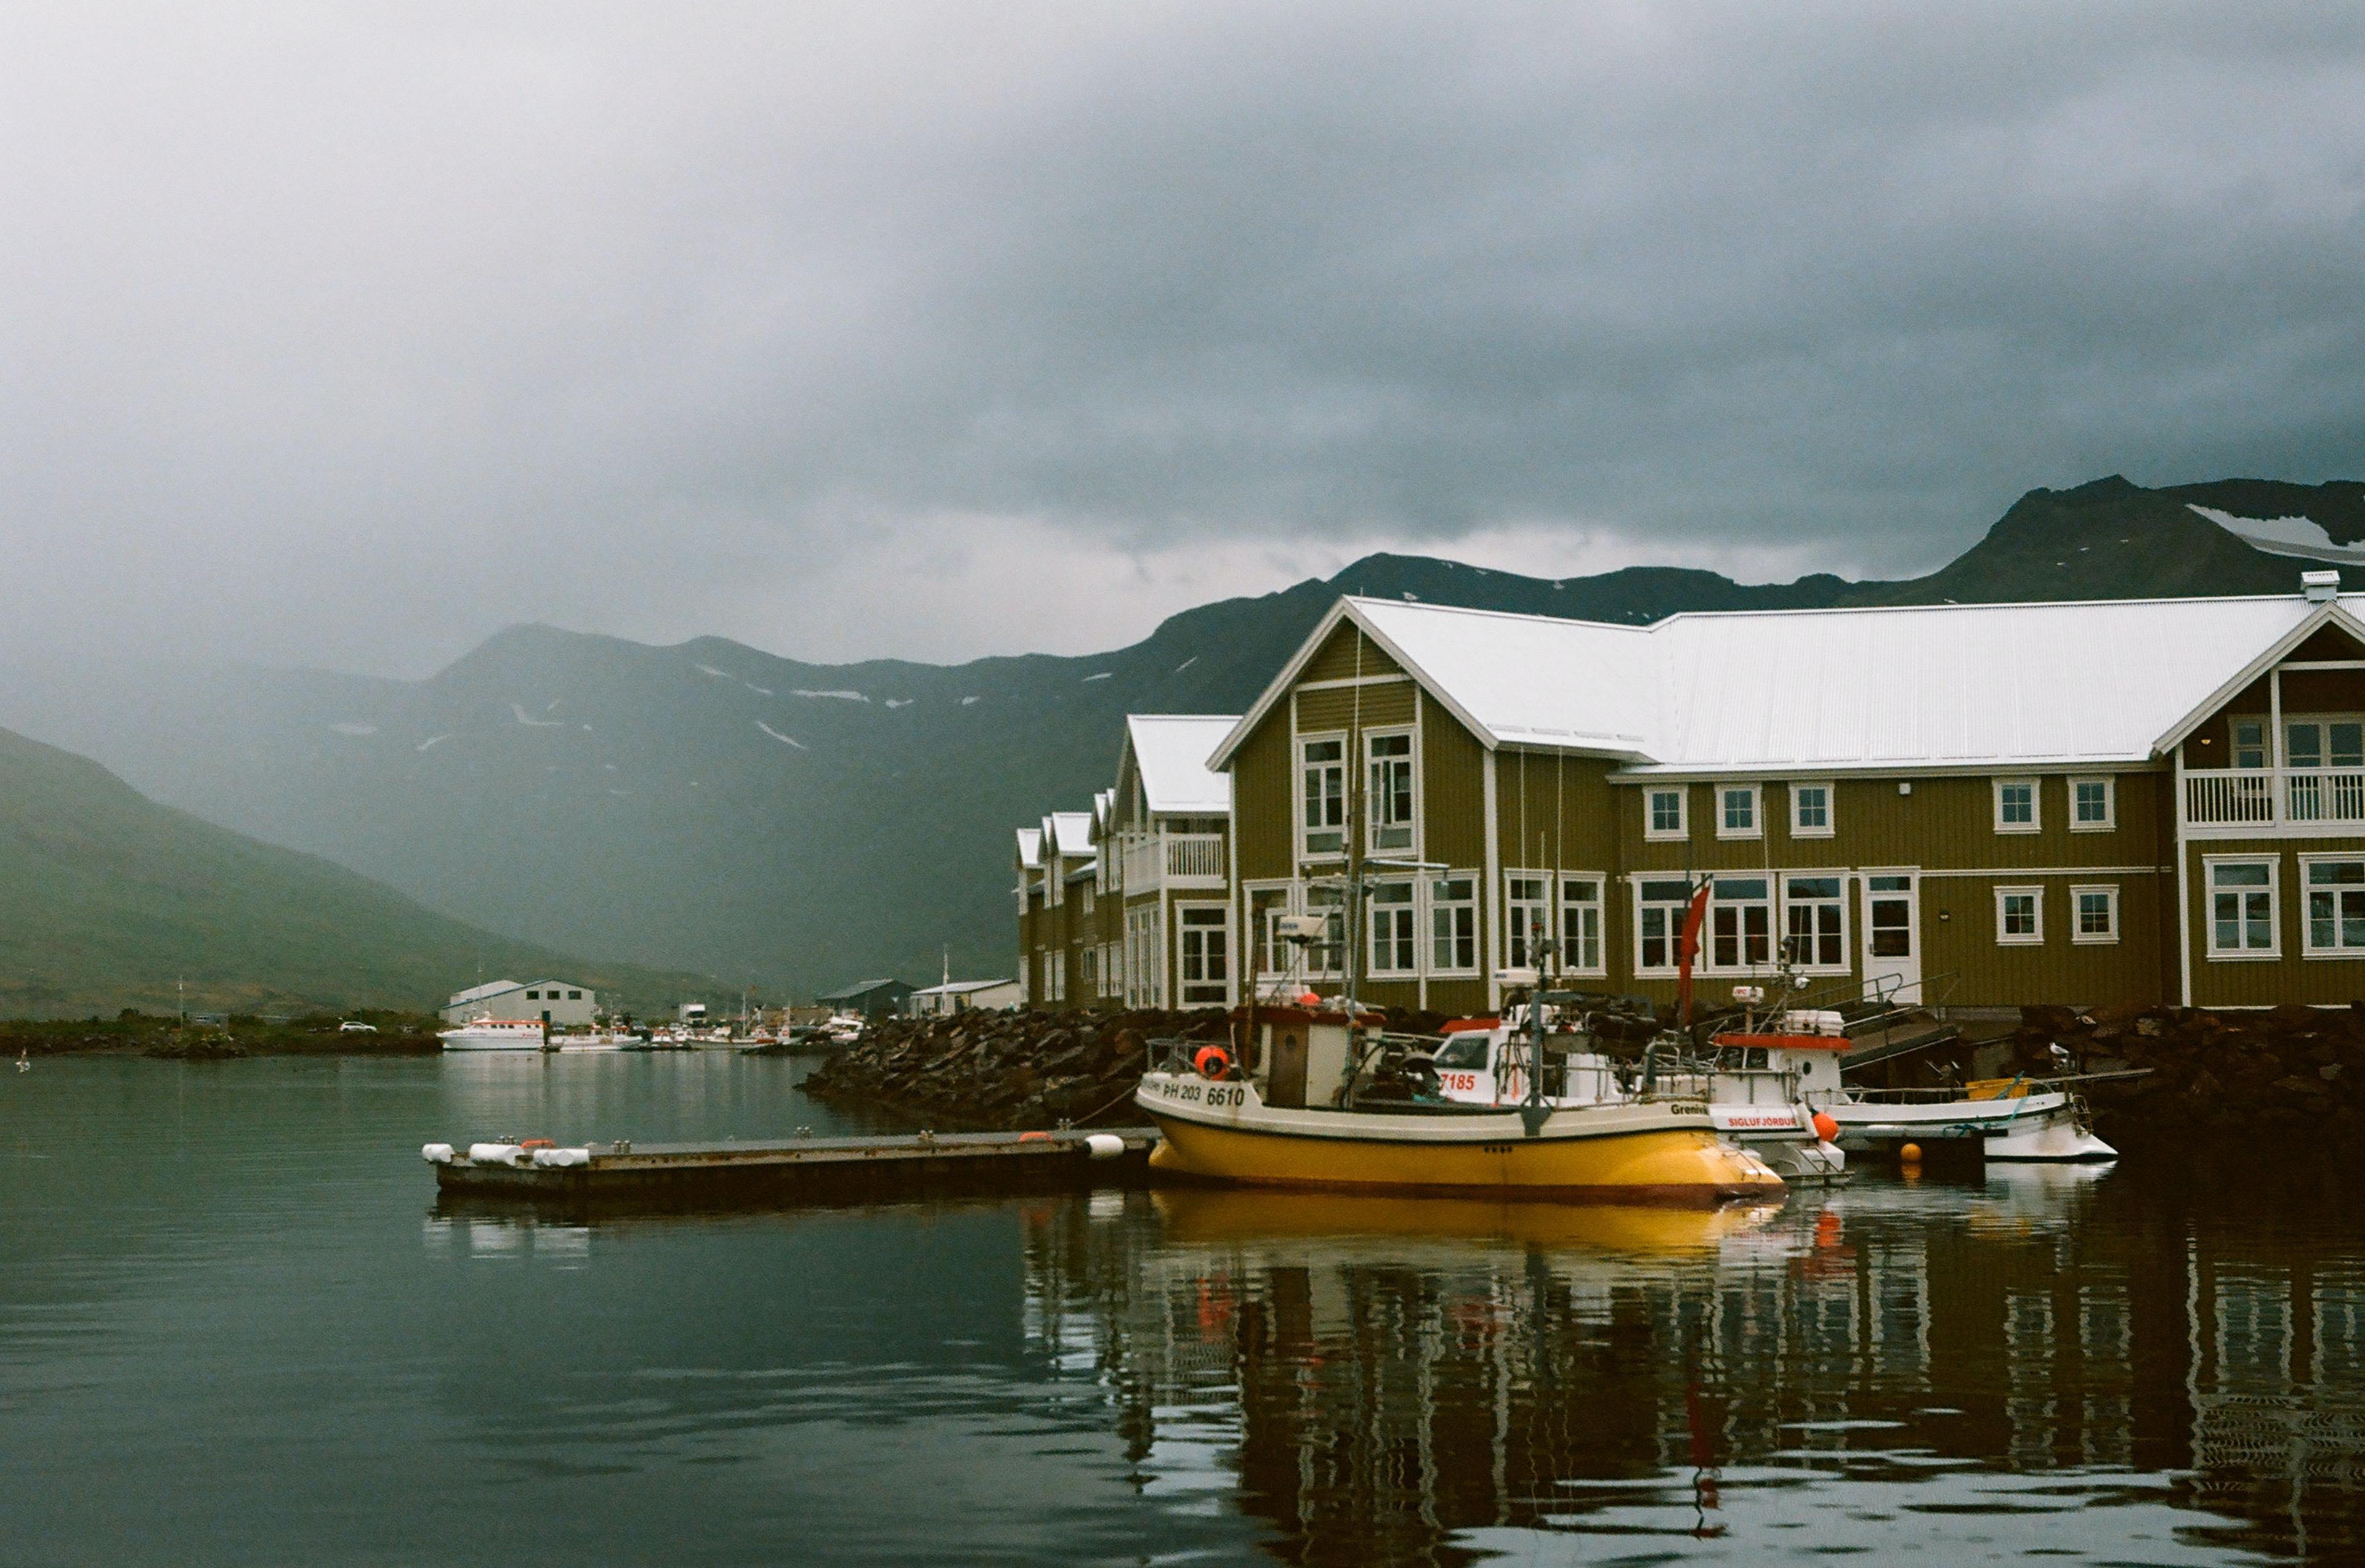 Traditional house situated on the edge of a tranquil sea bay, surrounded by small boats, with a misty and atmospheric landscape in the background